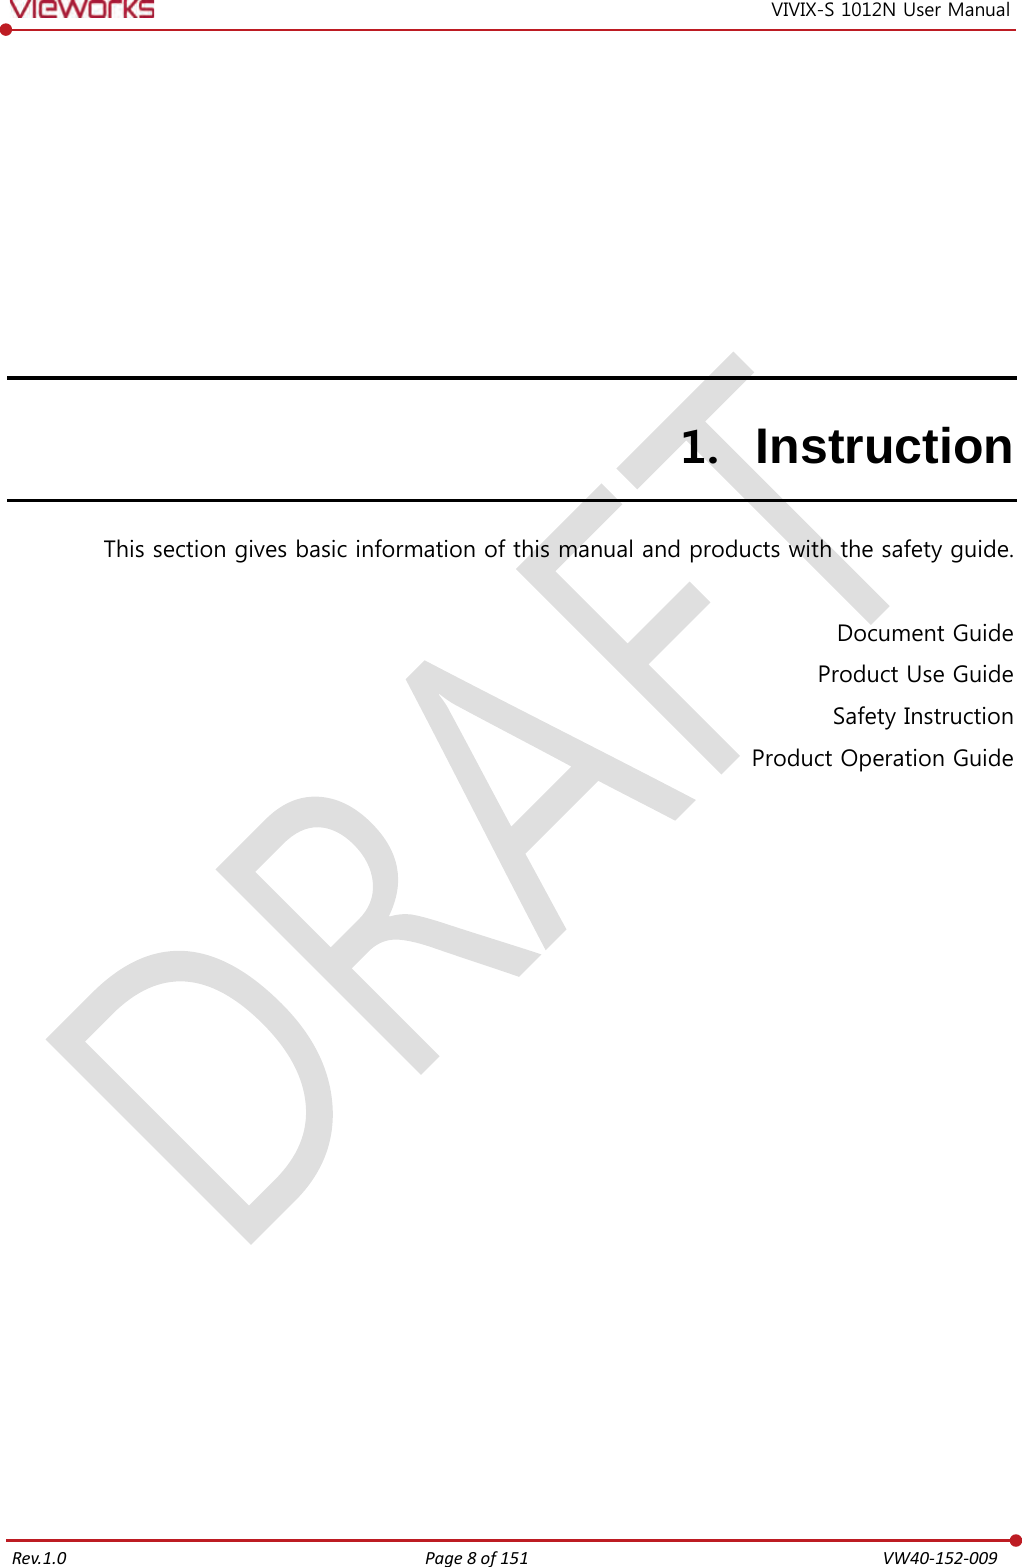   Rev.1.0 Page 8 of 151  VW40-152-009 VIVIX-S 1012N User Manual 1. Instruction This section gives basic information of this manual and products with the safety guide.  Document Guide Product Use Guide Safety Instruction Product Operation Guide  